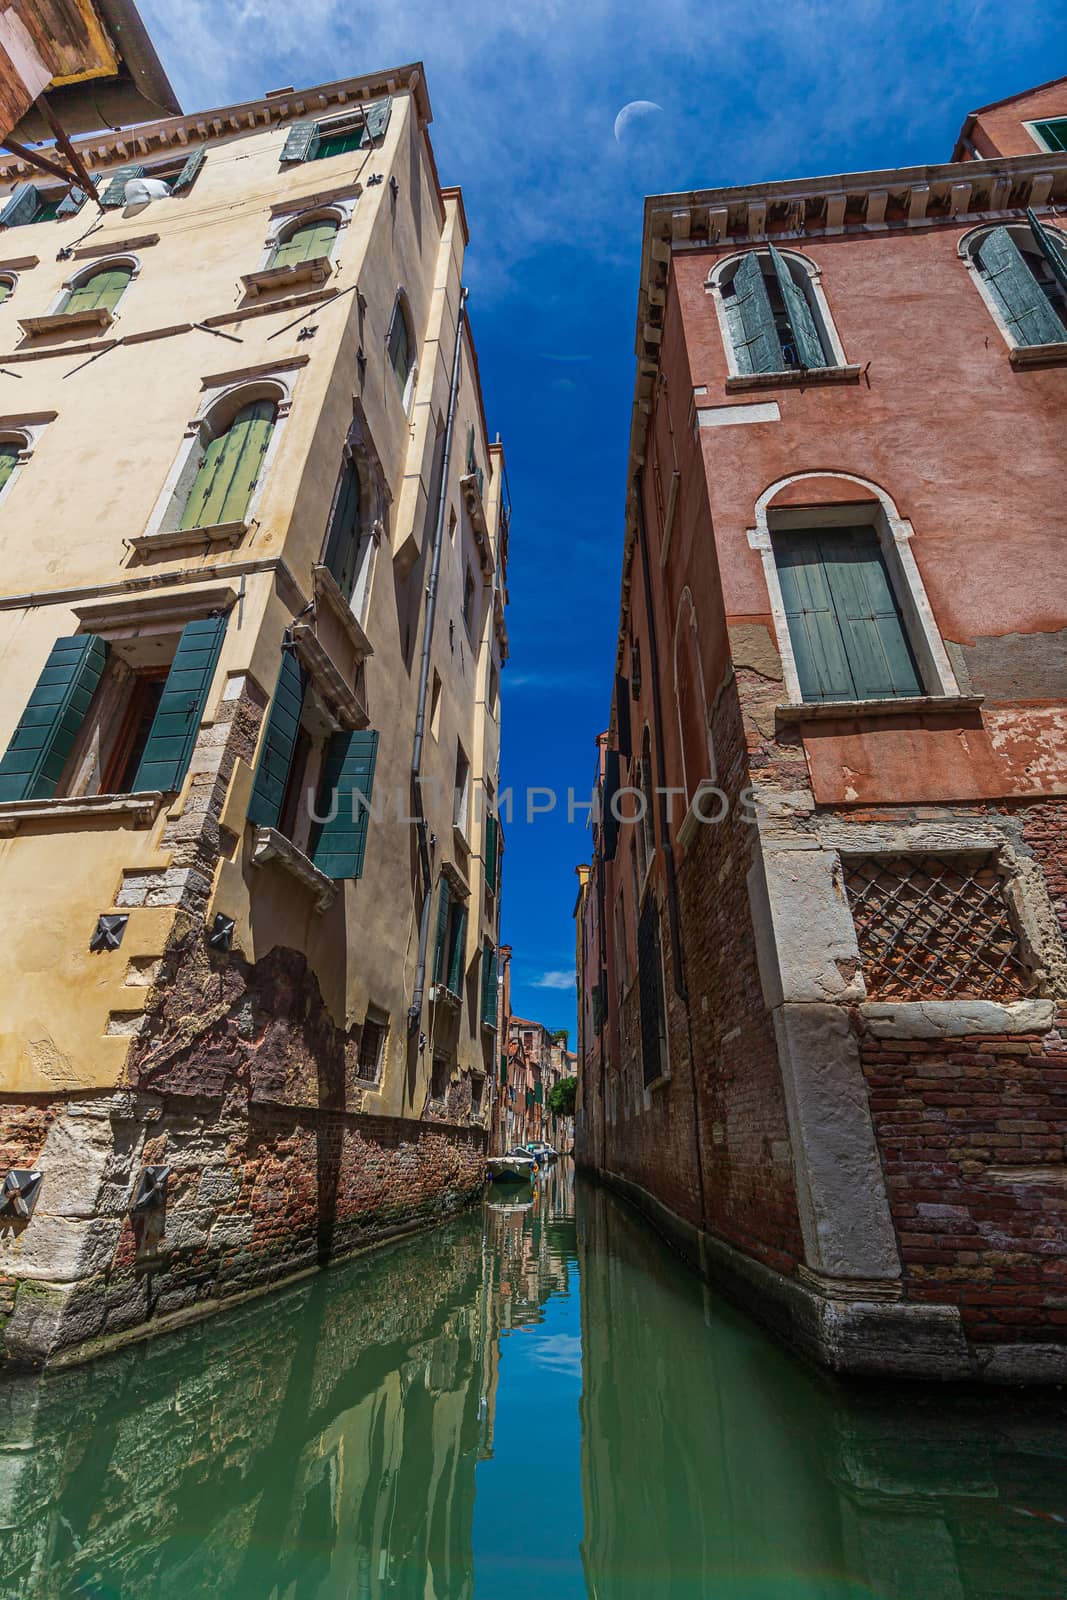 Narrow canal among old brick houses in Venice, Italy by COffe